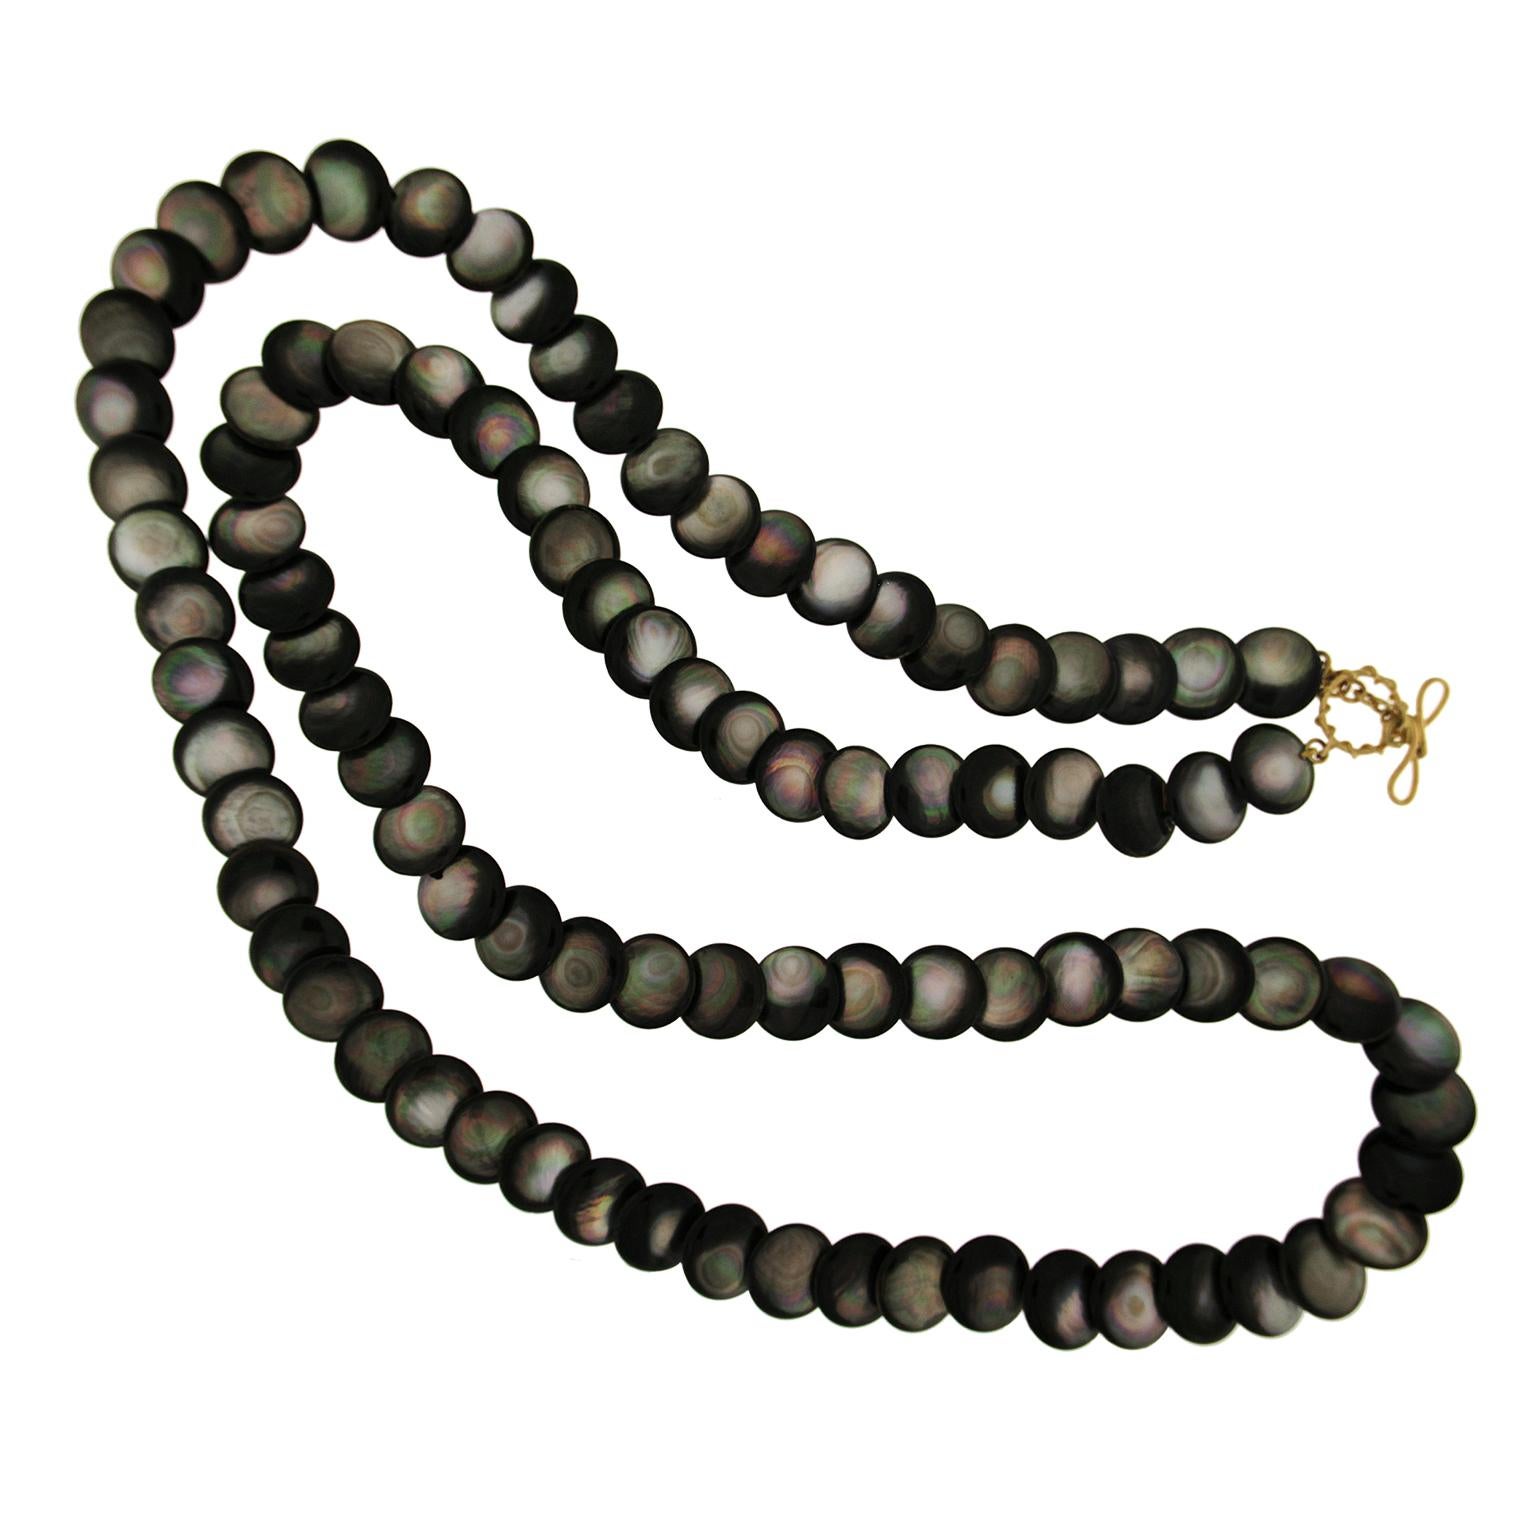 Valentin Magro Black Mother of Pearl Necklace swirls with rainbows. The jewel of choice is mother of pearl with black or deep grey bodycolors, fashioned into disks. Light scatters when it reaches the gem, splitting into prismatic hues. These colors,